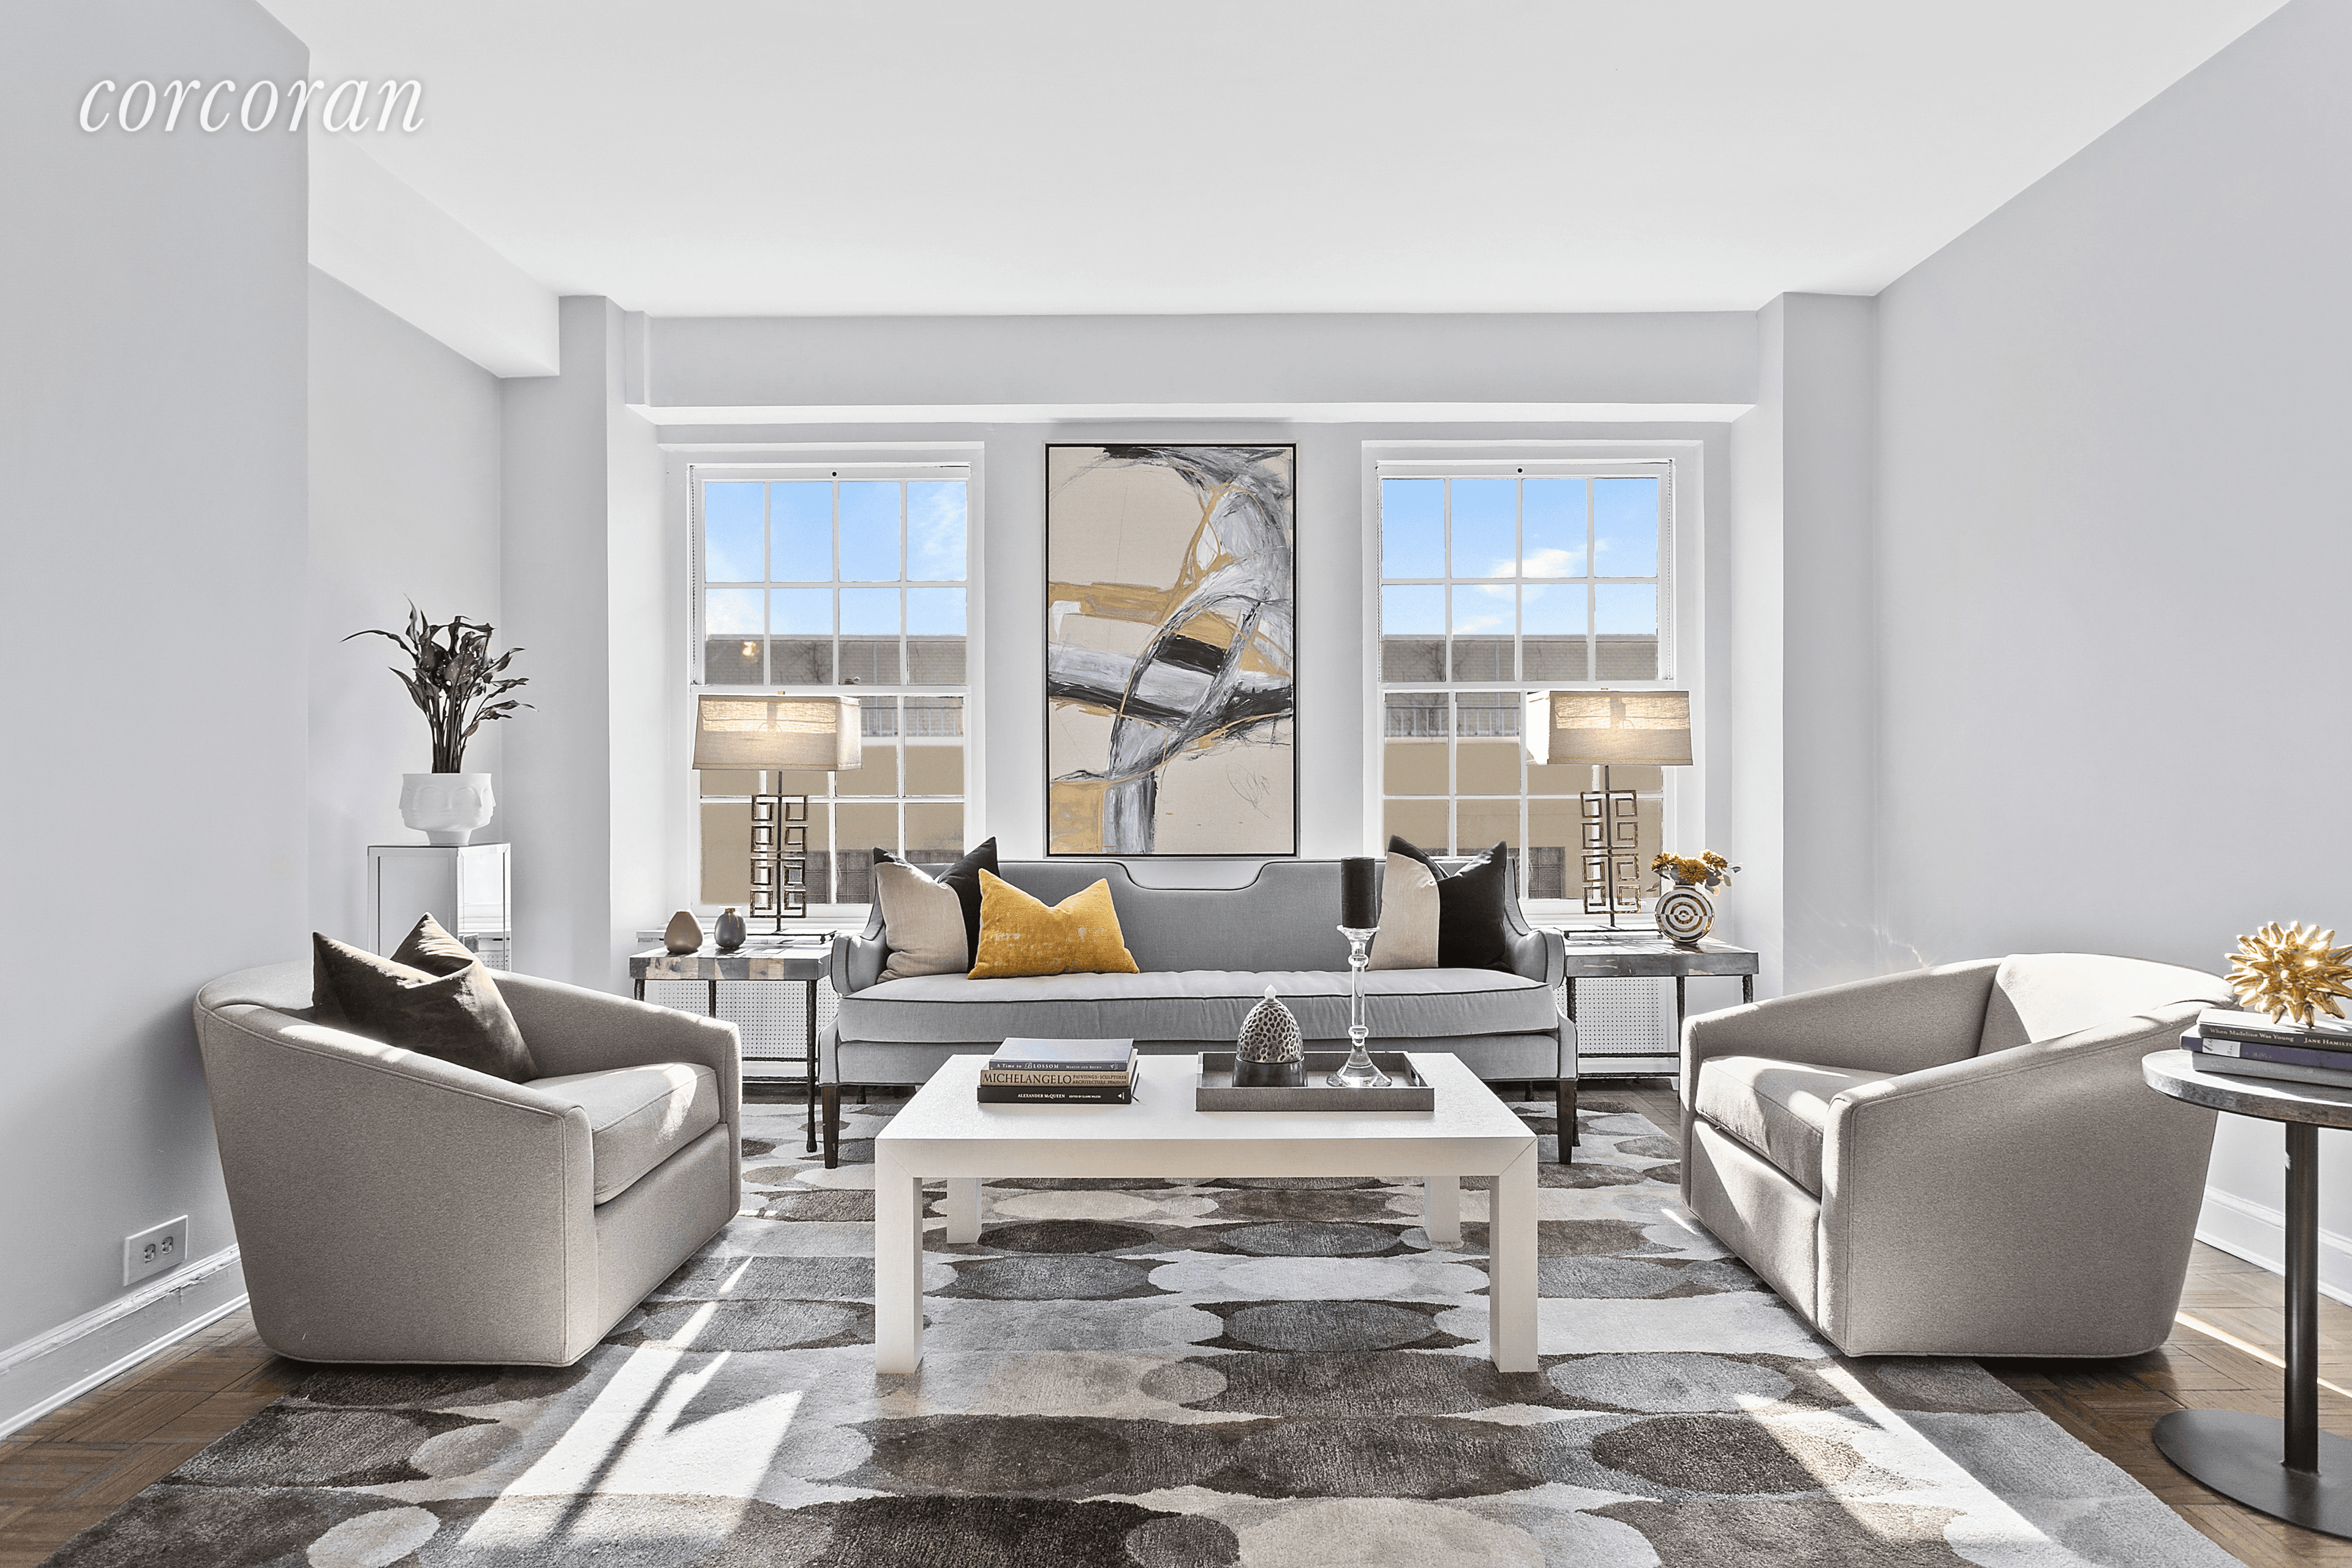 Stunning and spacious south facing residence at iconic One Fifth Avenue with formal layout and 2 huge master suites, enjoy glorious natural light plus quiet for sleeping in this move ...